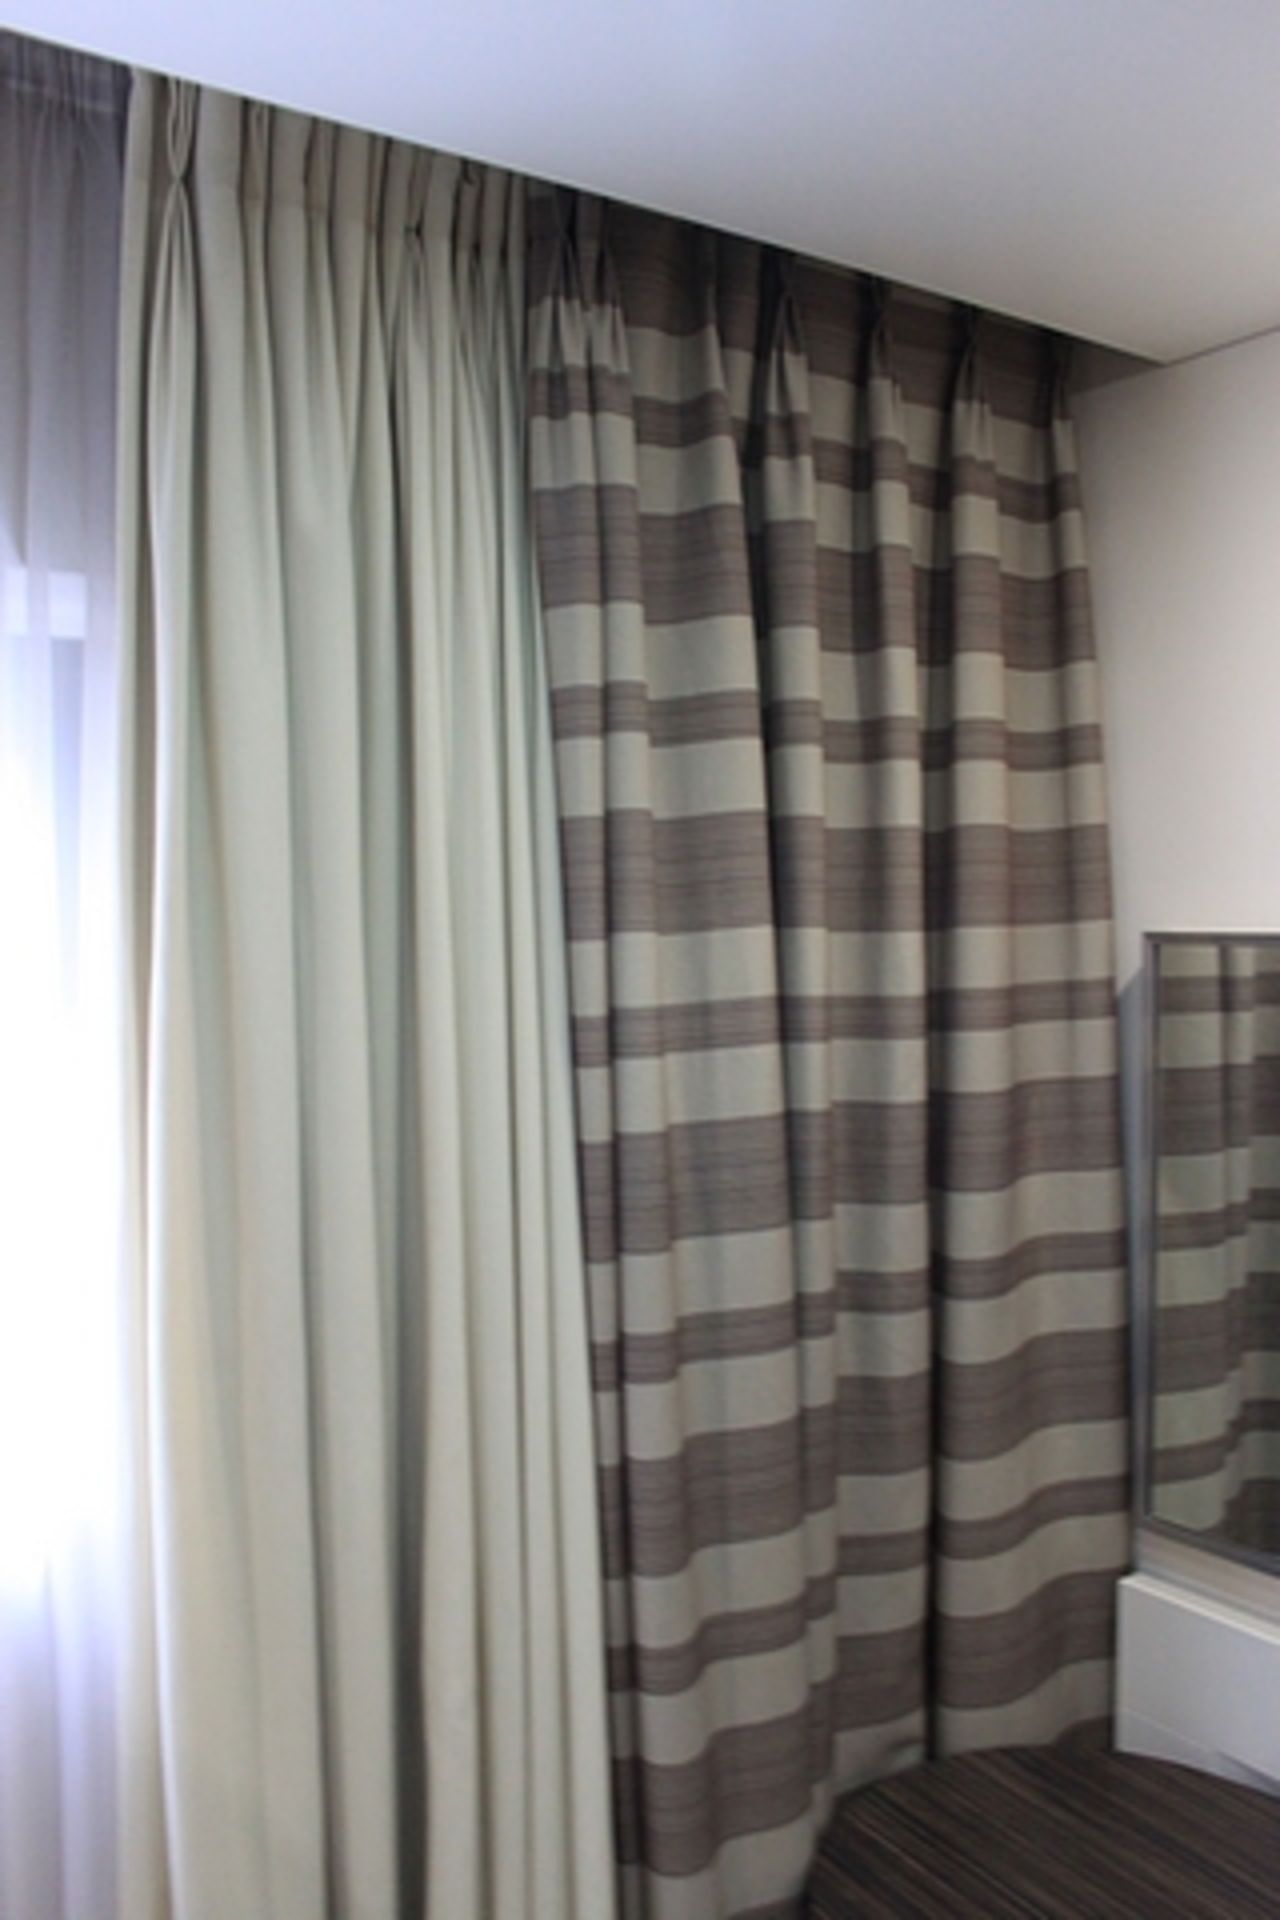 Sinclaire Fabrics a pair of drapes lined with blackout fabric spans 2000 x 2600mm (FM32AP1)